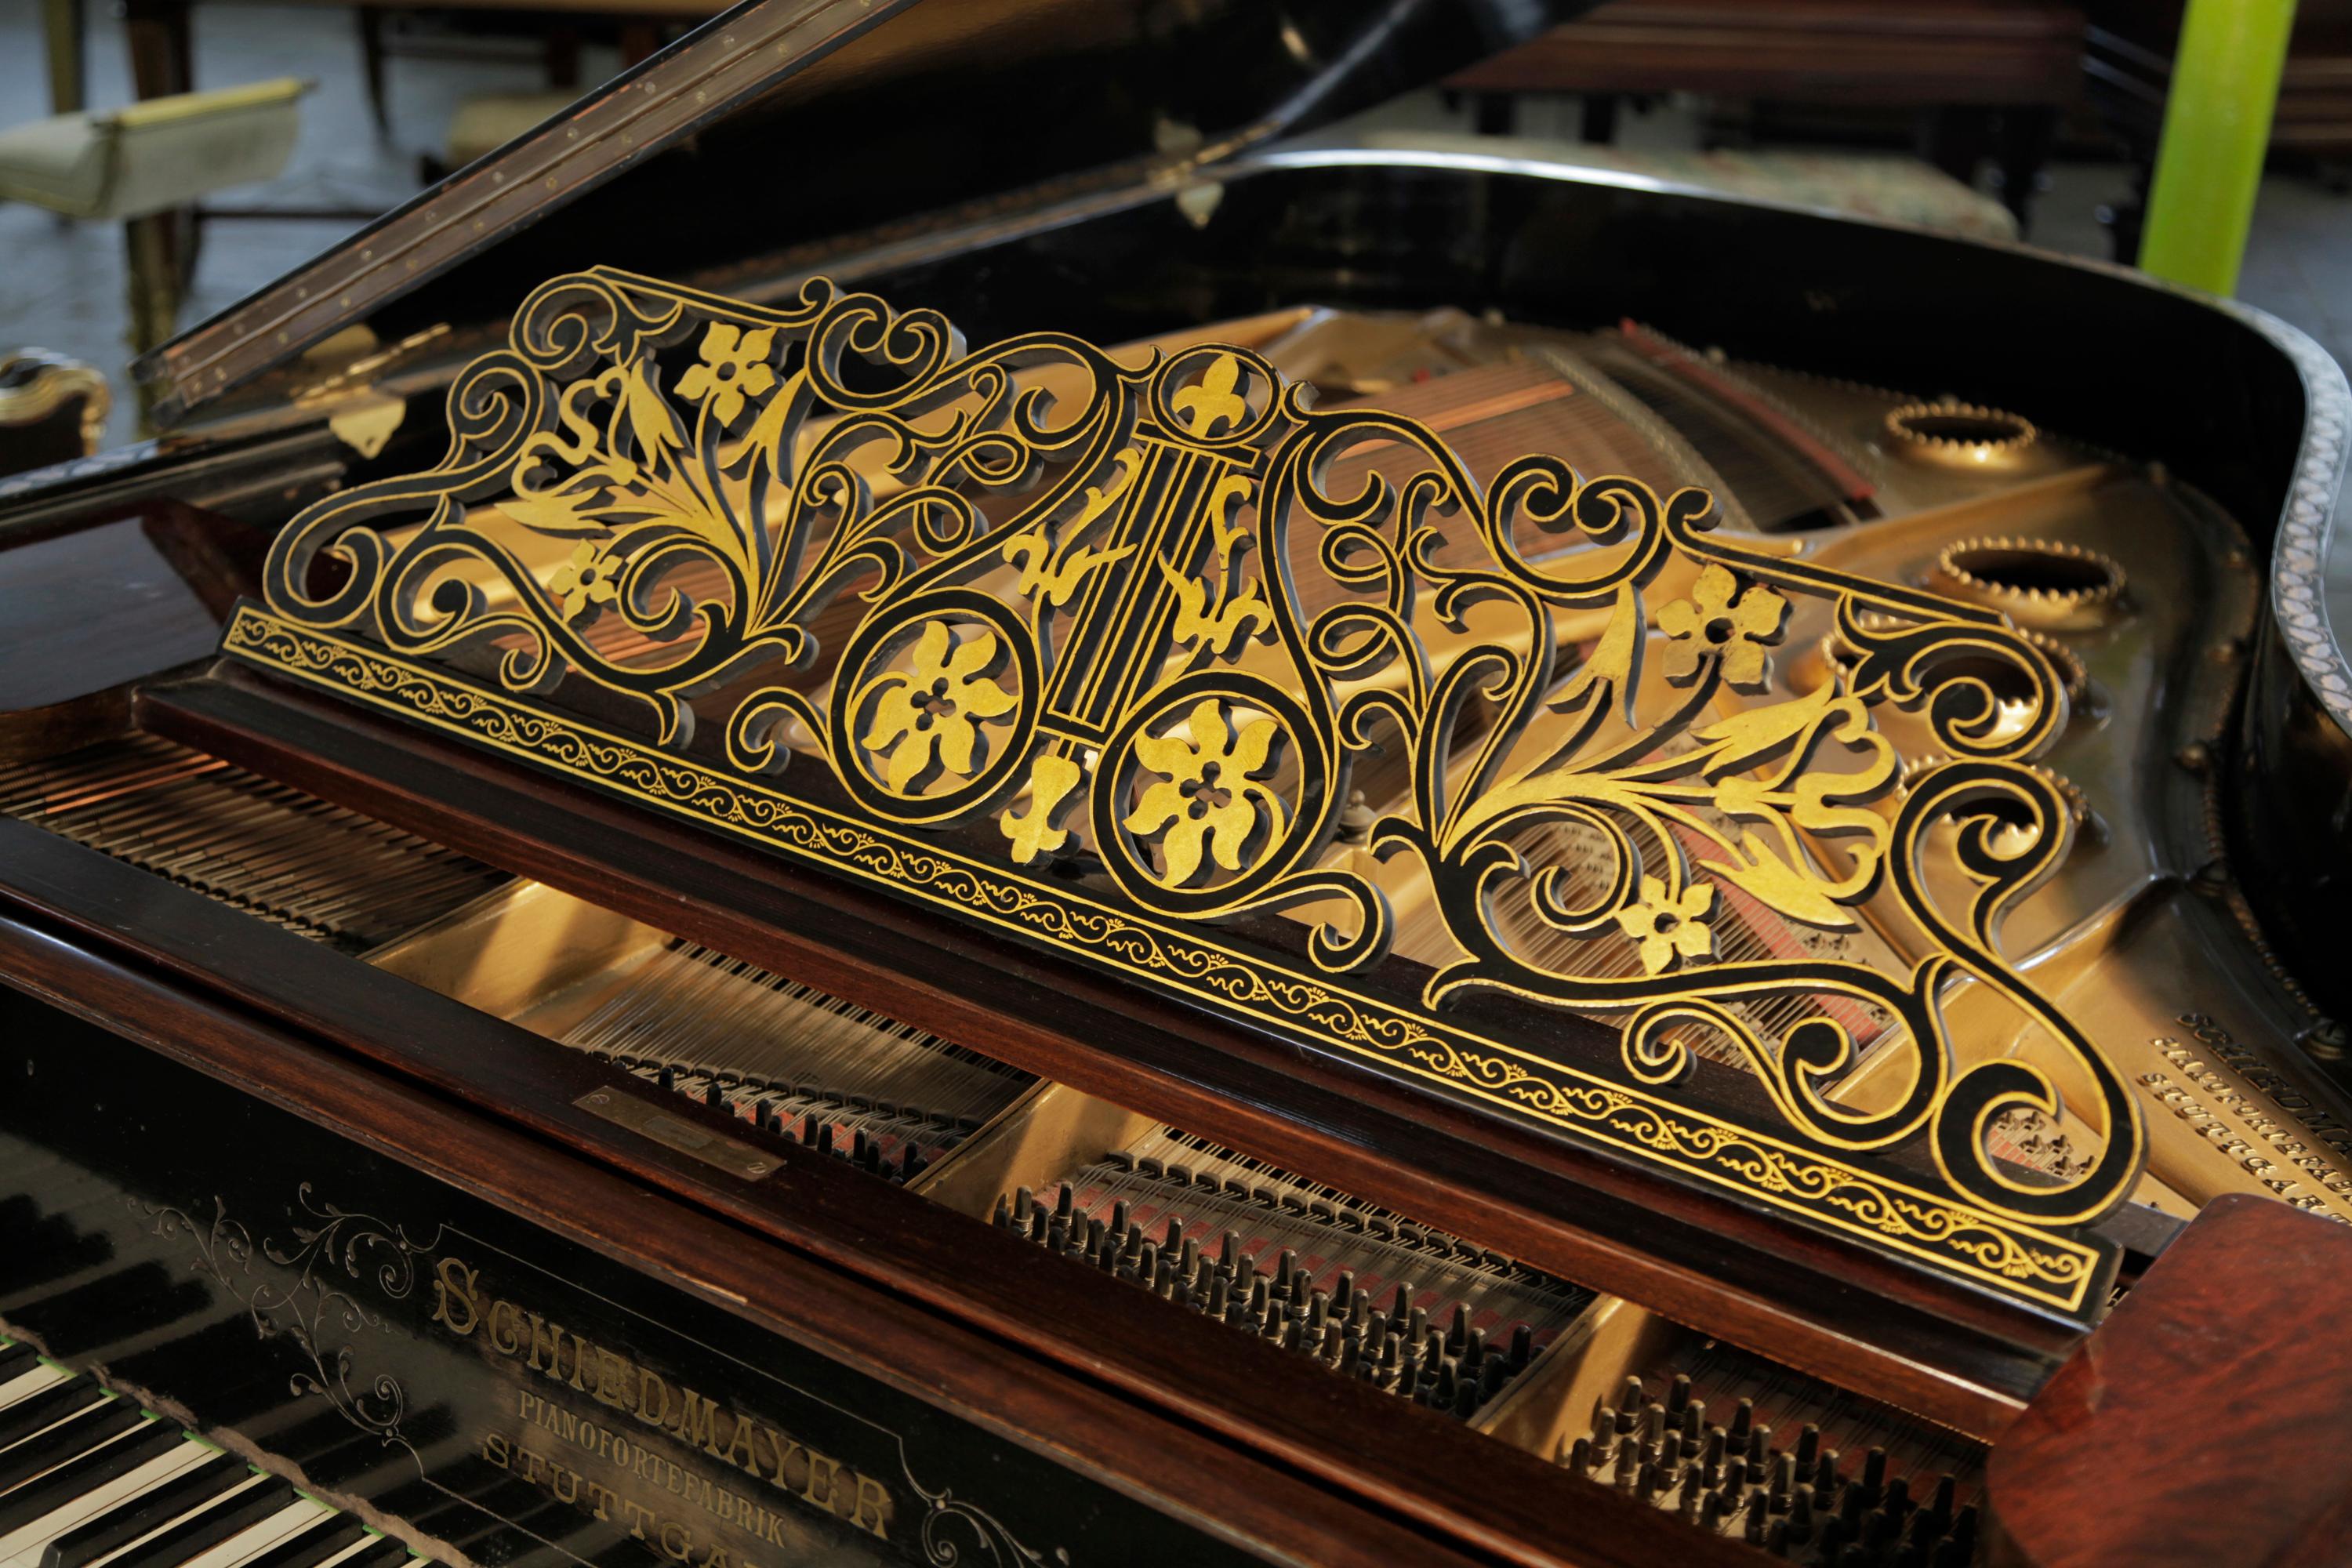 Chinese Chippendale style, 1899, Schiedmayer grand piano with a flame mahogany case and Malborough legs with applied fret carvings. Cabinet features oriental scenes in embossed Japanning with gilt ornament.
The pierced, filigree music desk is in a